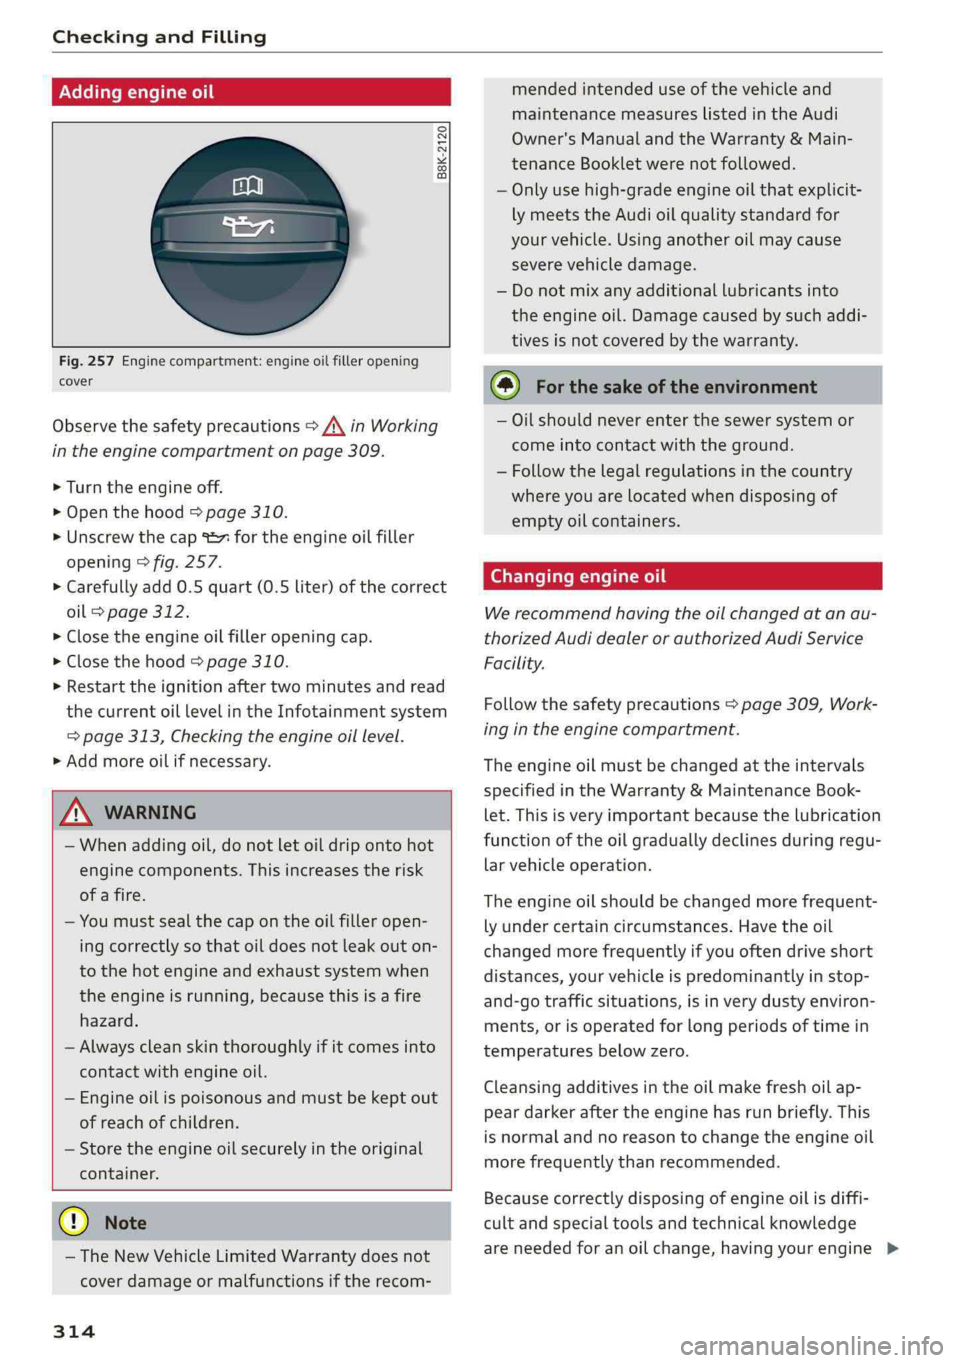 AUDI A4 2019  Owners Manual CheckingandFilling
 
Addingengineoil
 
B8K-2120
 
 
  
Fig.257Enginecompartment:engineoilfilleropening
cover
Observethesafetyprecautions>A\inWorking
intheenginecompartmentonpage309.
>Turn theengineoff